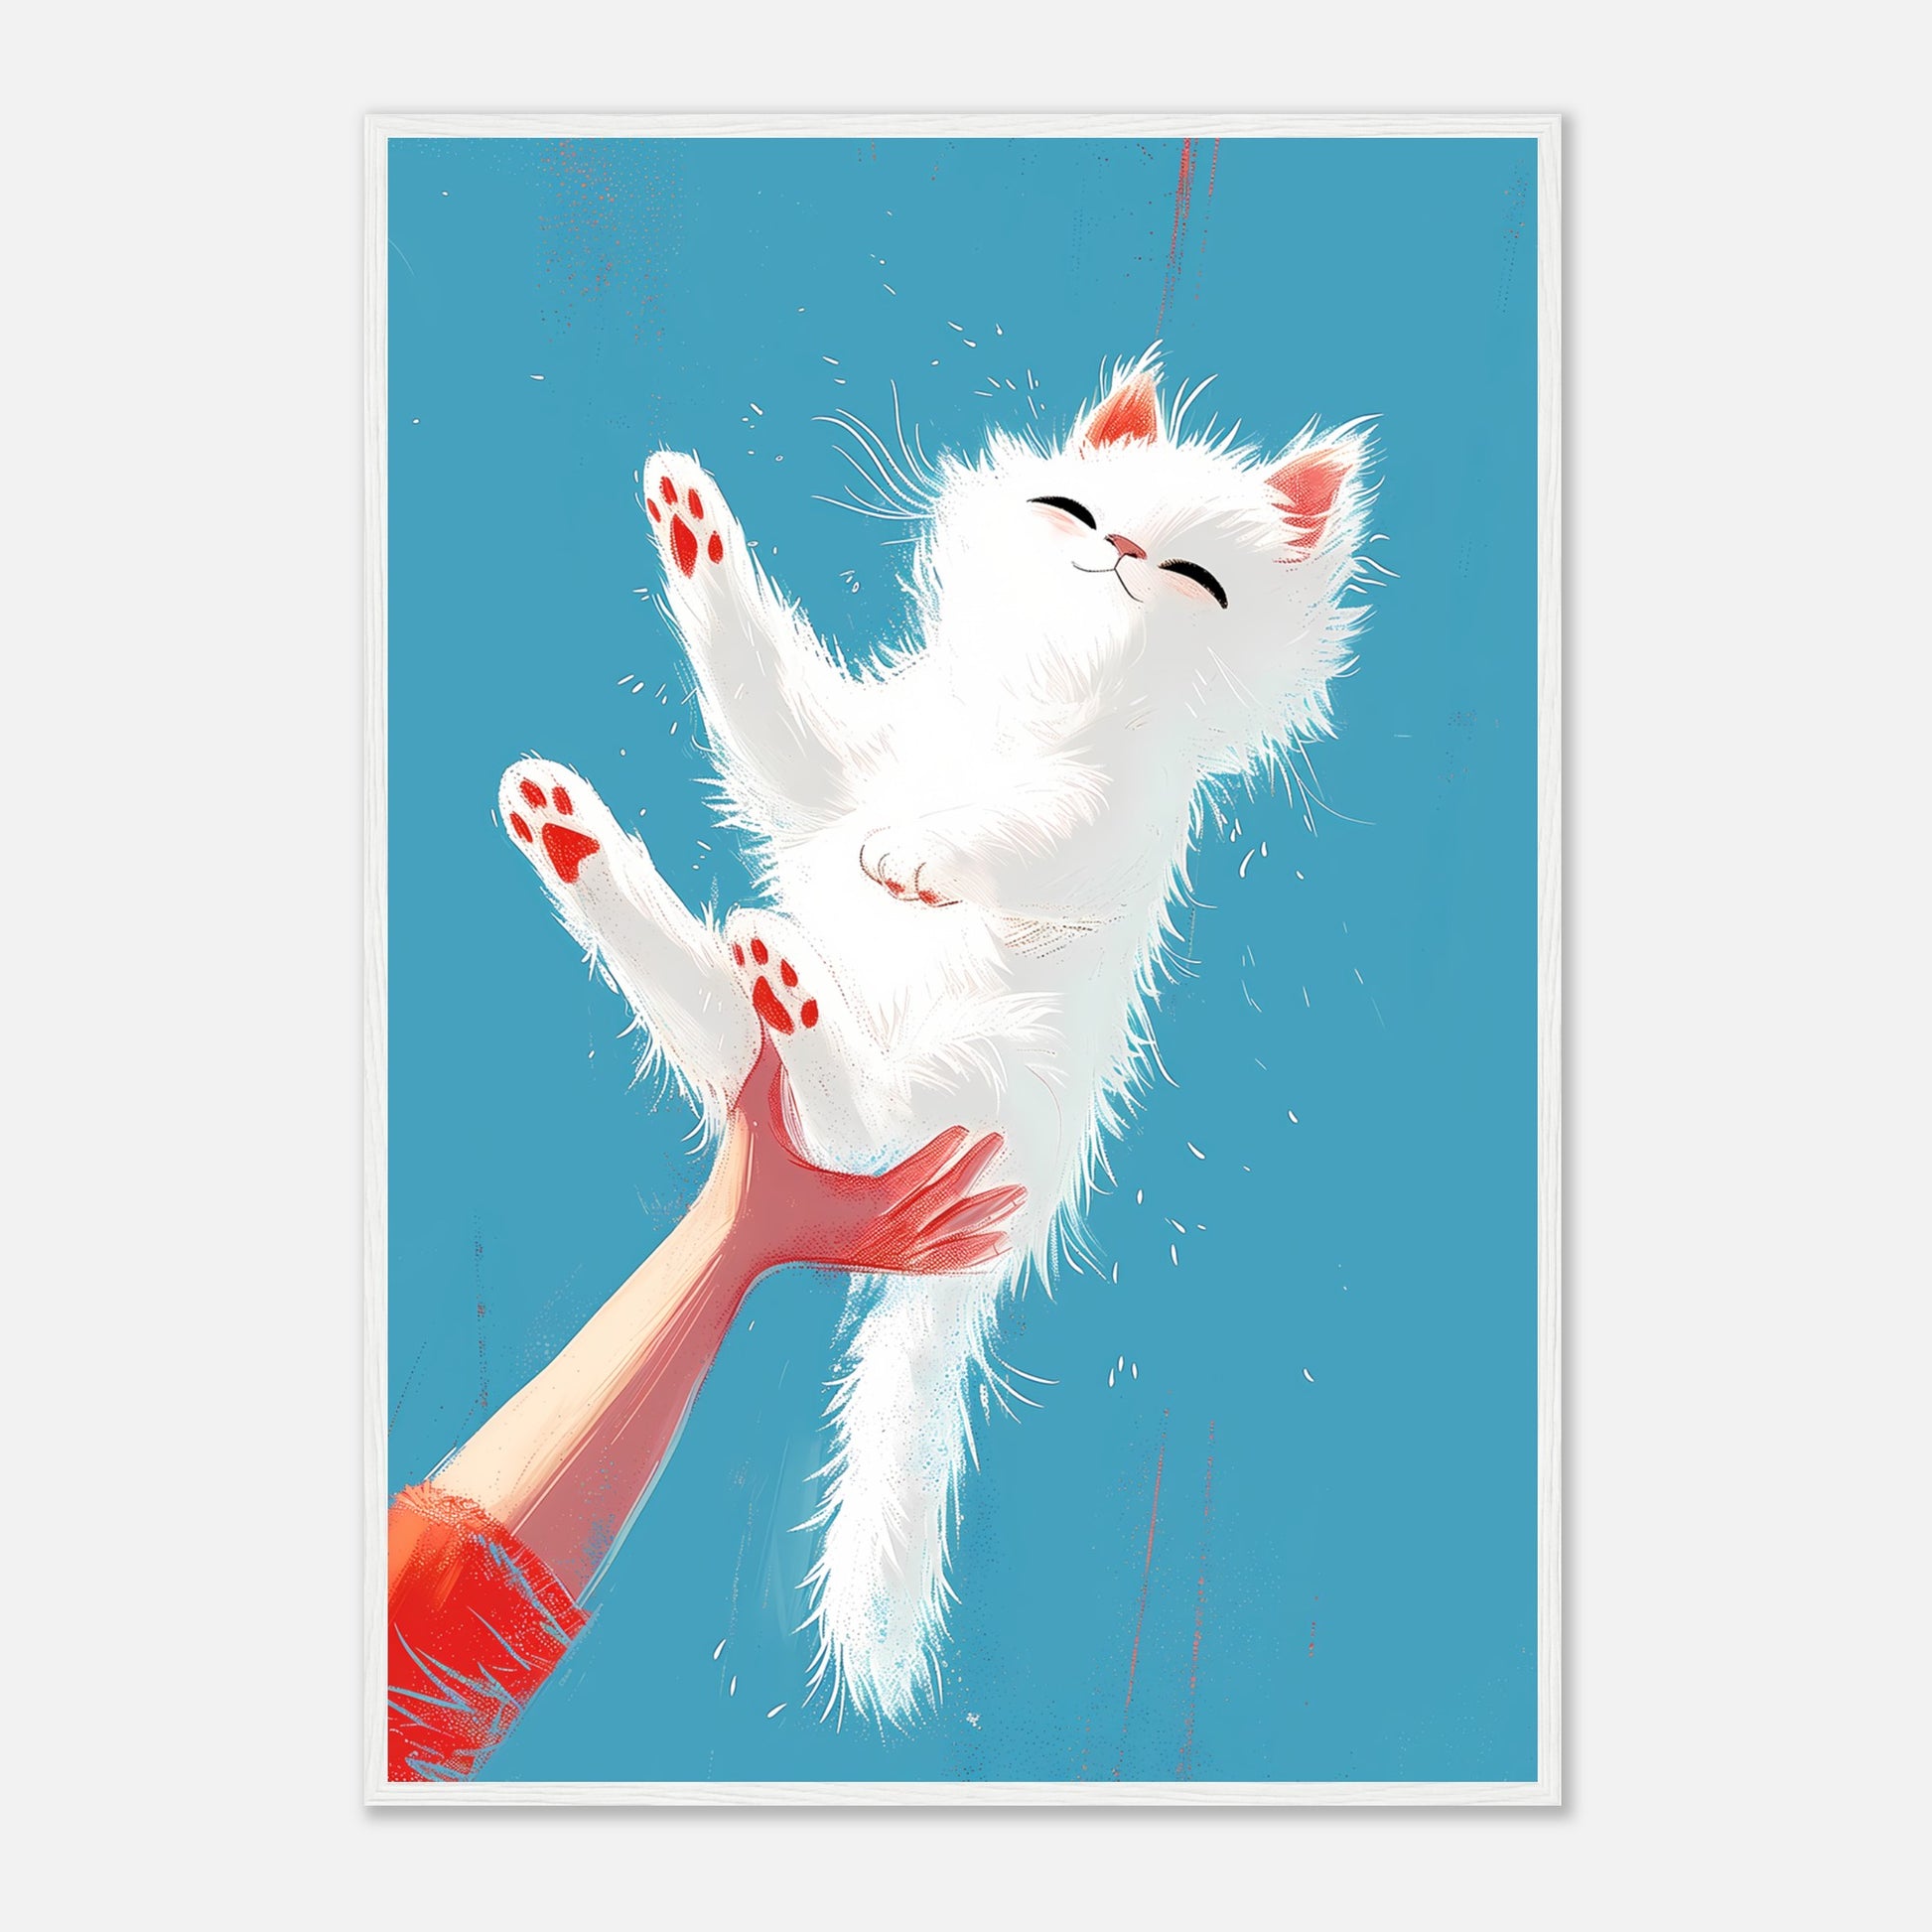 A framed illustration of a white fluffy kitten playfully swatted into the air by a human hand.